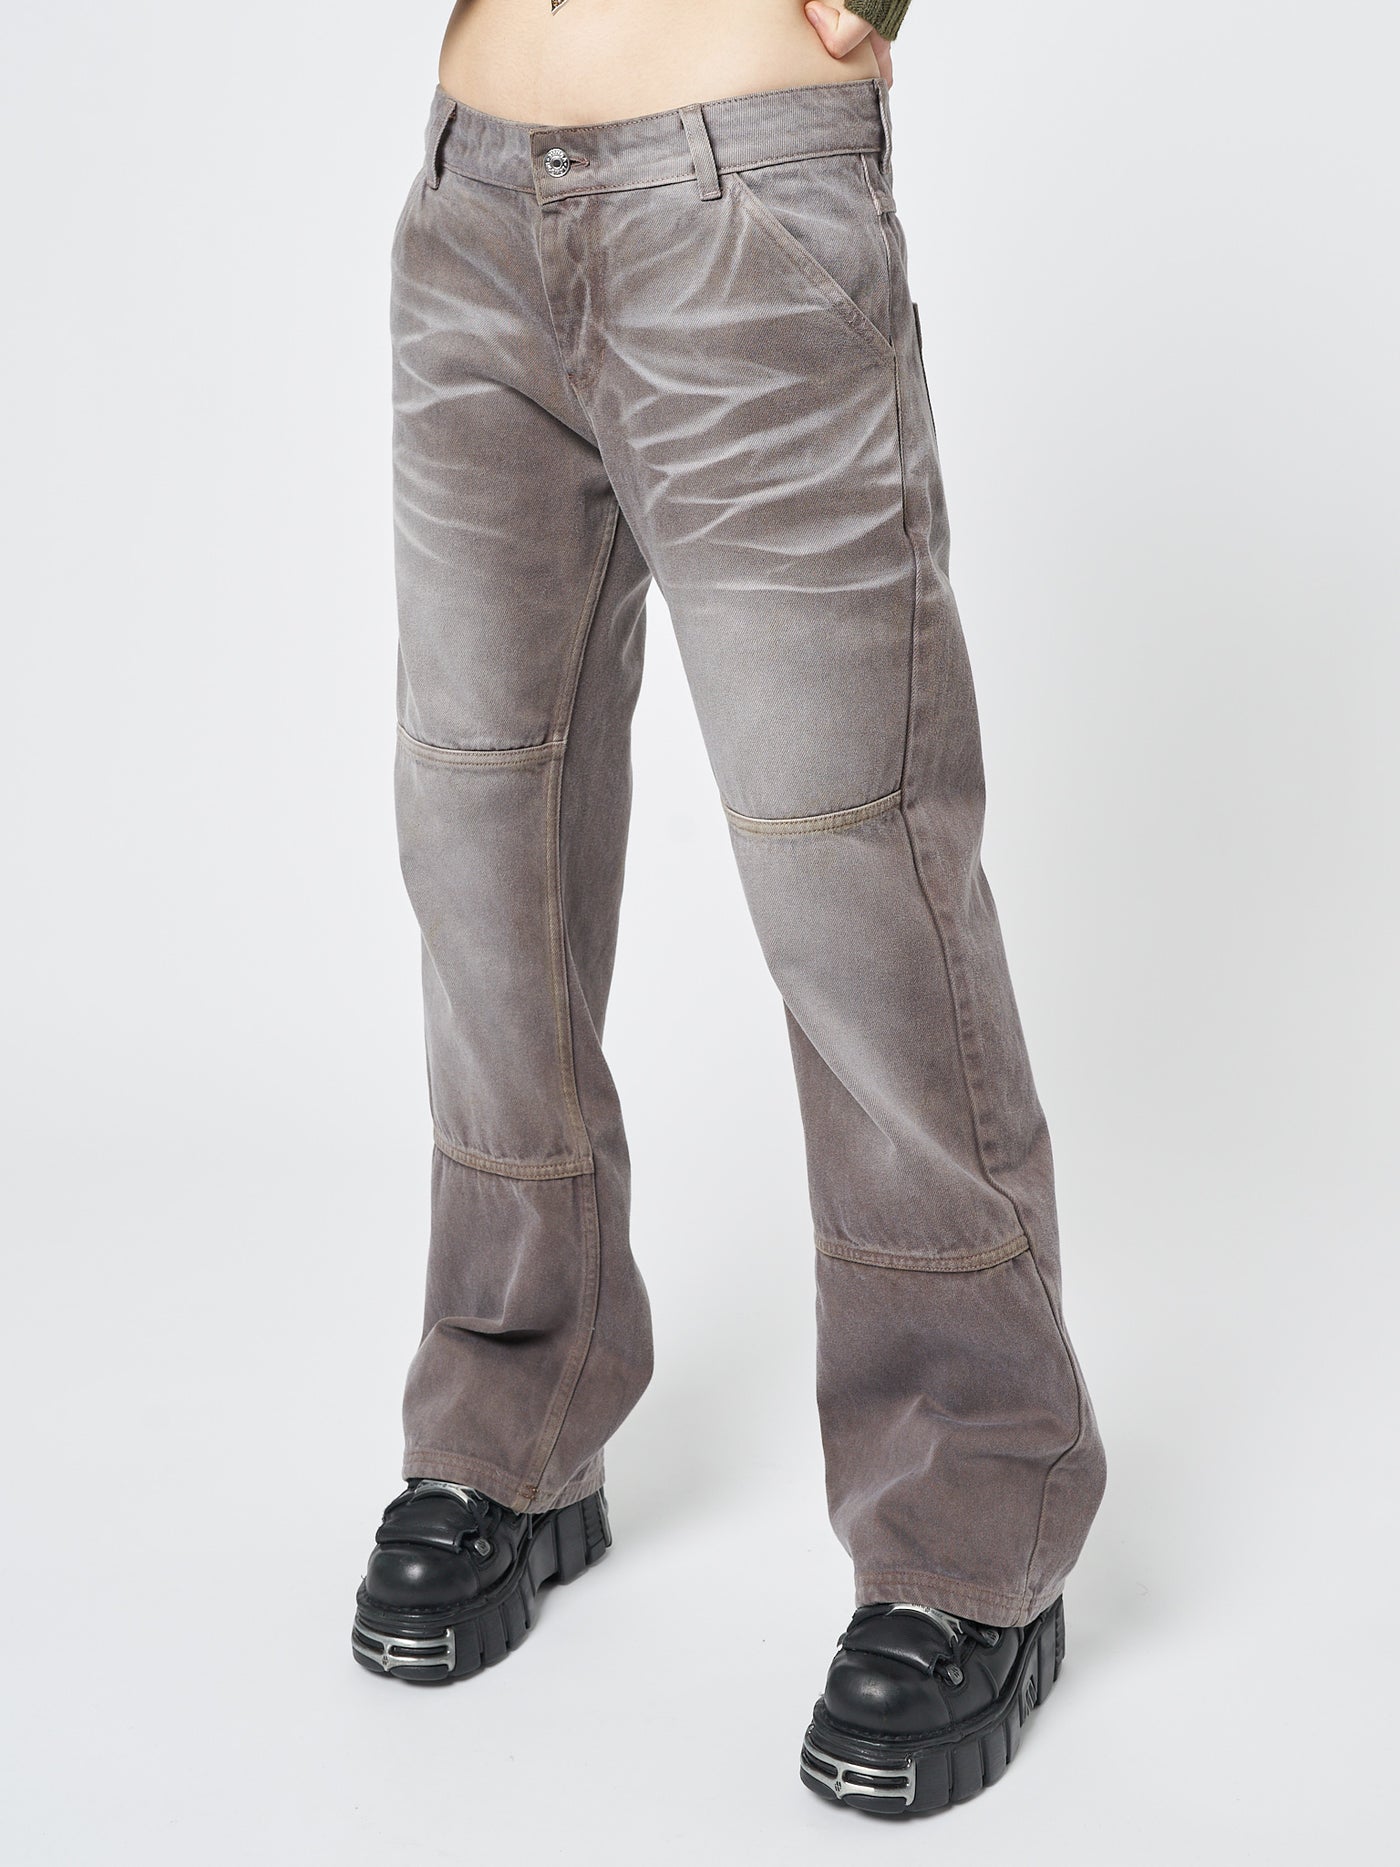 These brown straight jeans feature a washed finish for a relaxed and casual look.